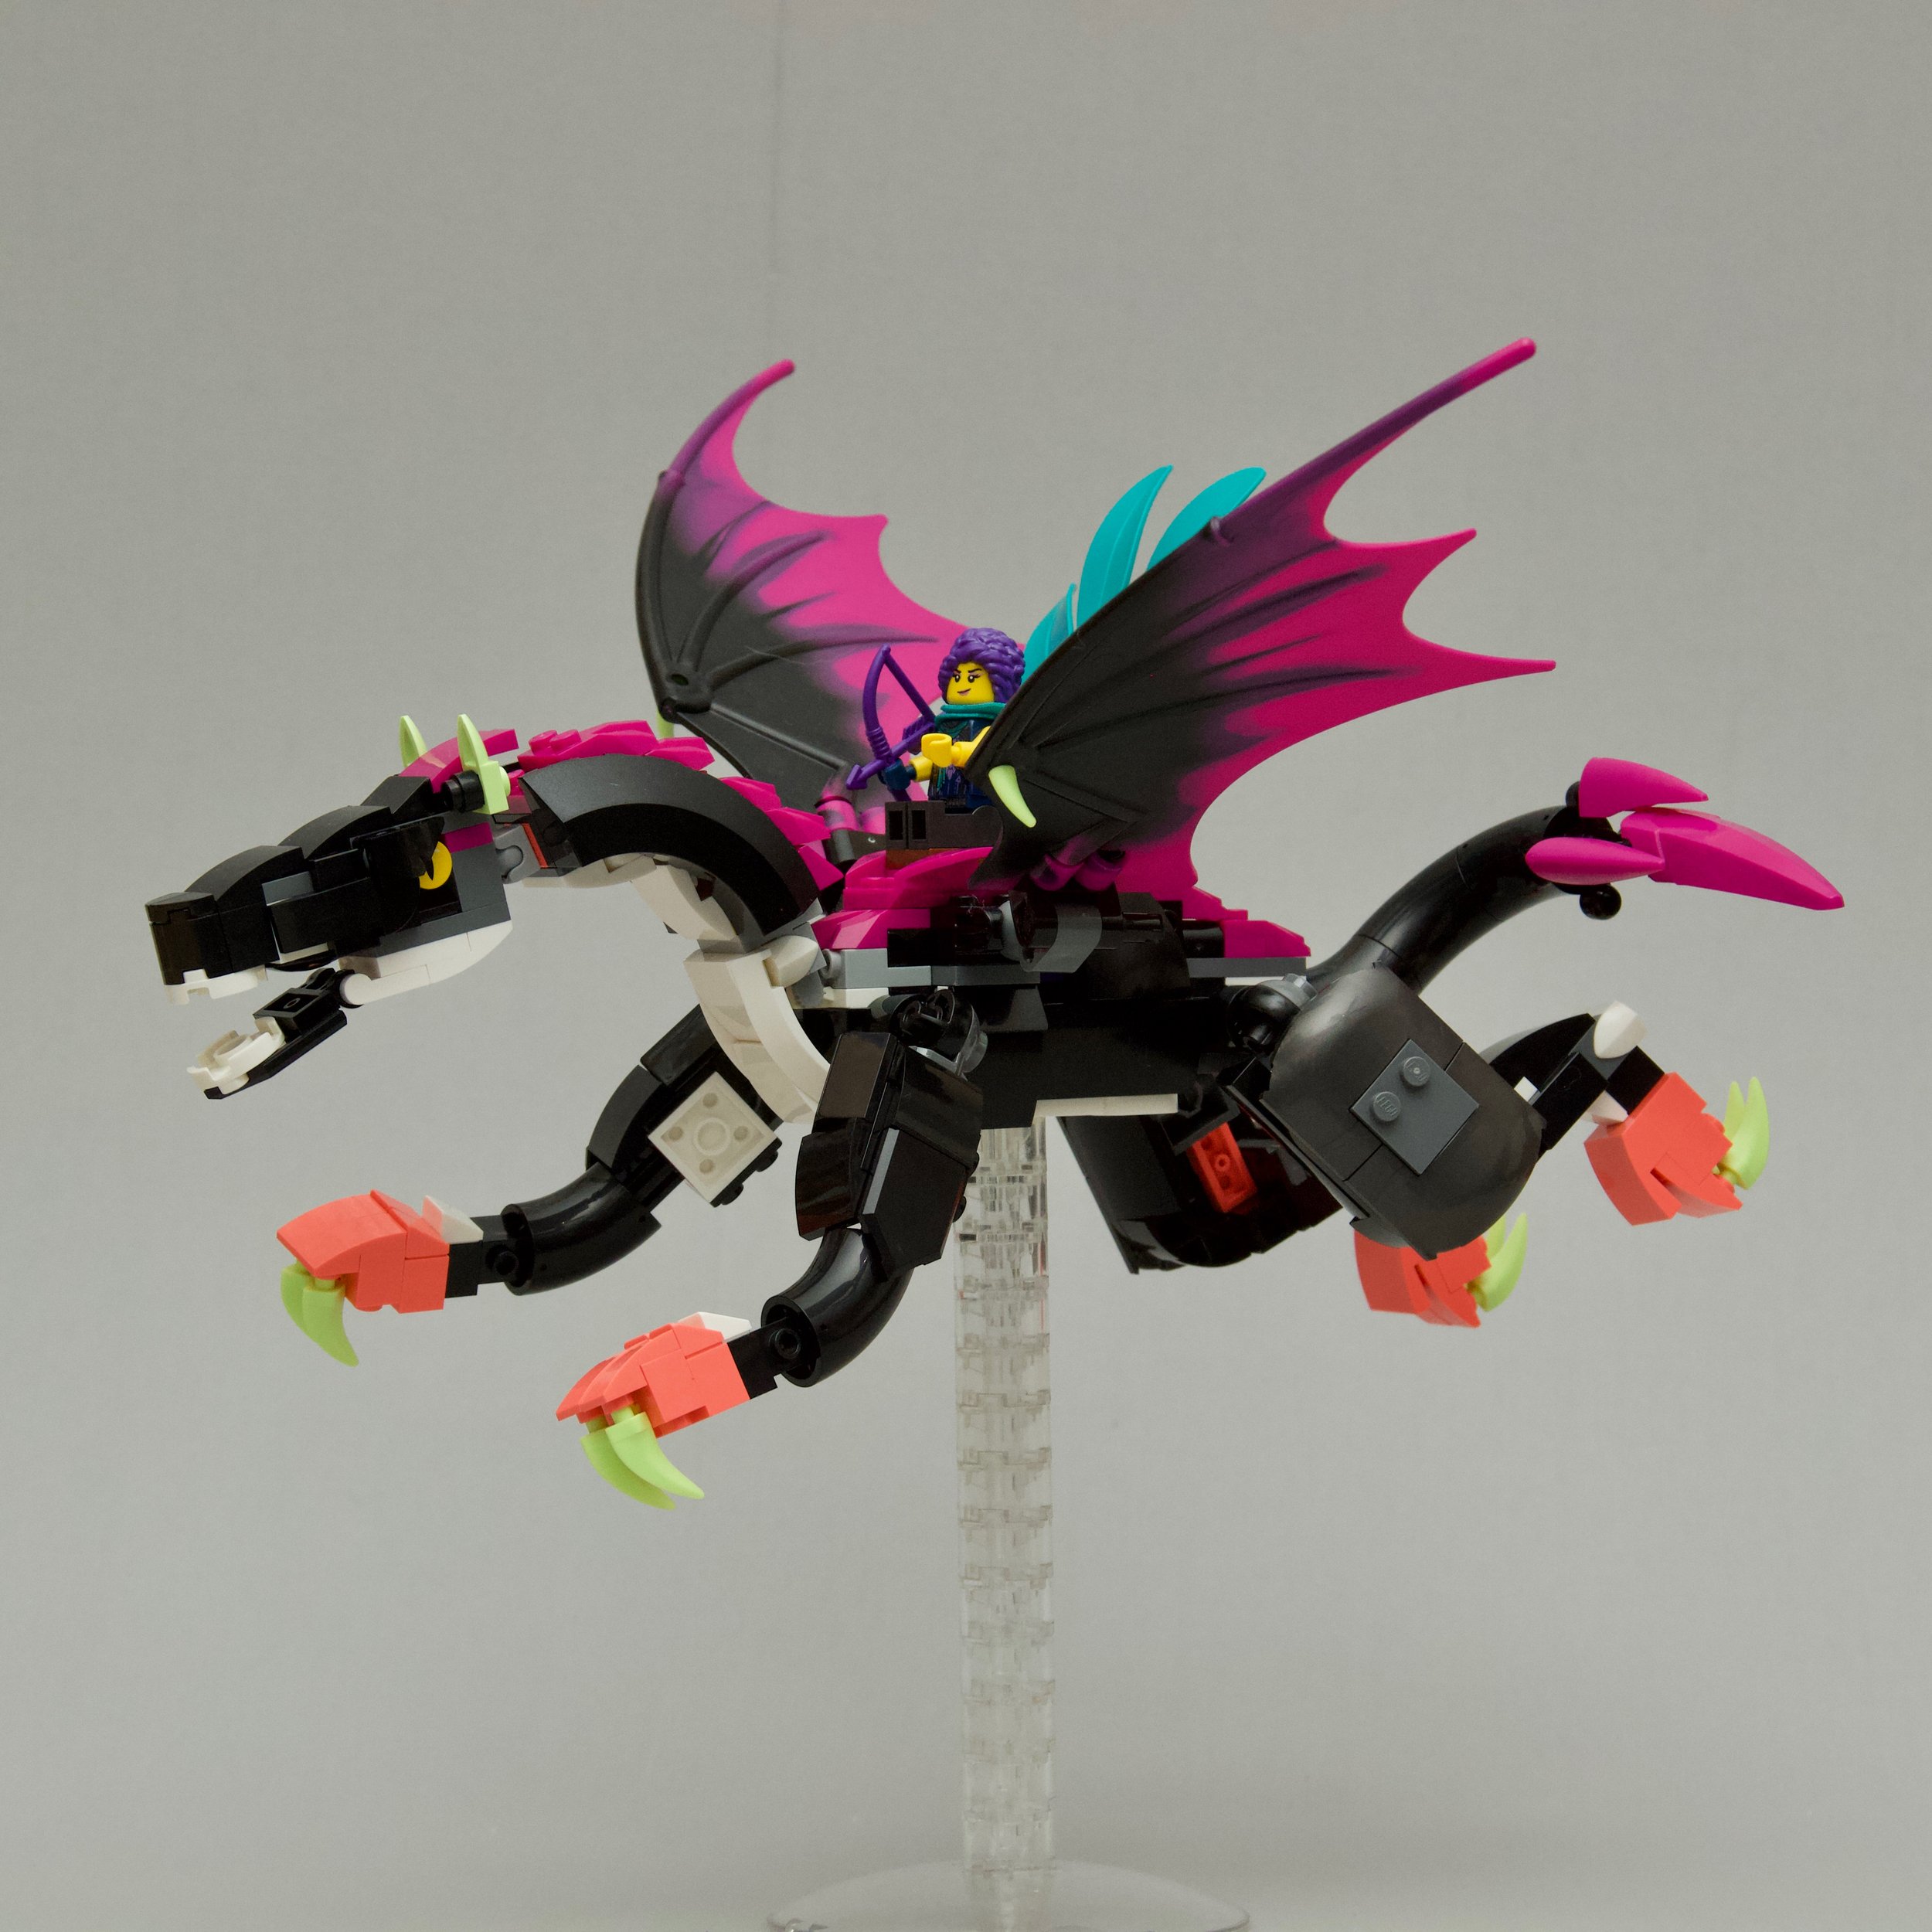 The Stuff of Nightmarezzz: Exploring the Darker Side of LEGO Dreamzzz -  BrickNerd - All things LEGO and the LEGO fan community